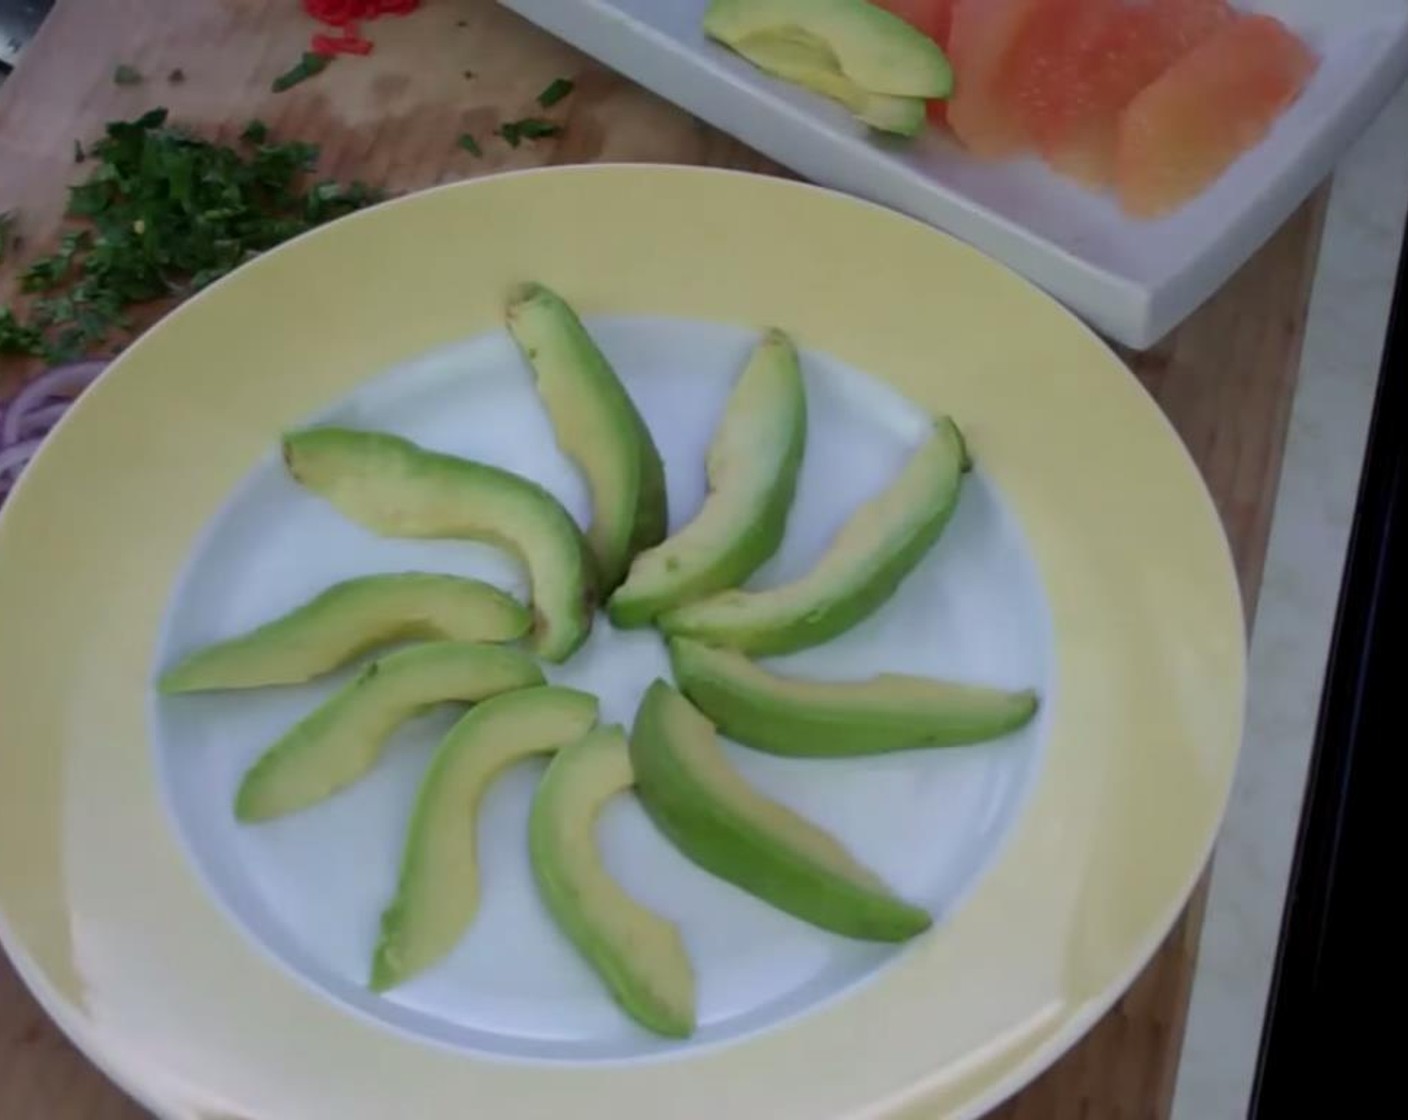 step 1 Thinly slice the Avocados (2) and lay them on the plate in a flared out design on the plate.